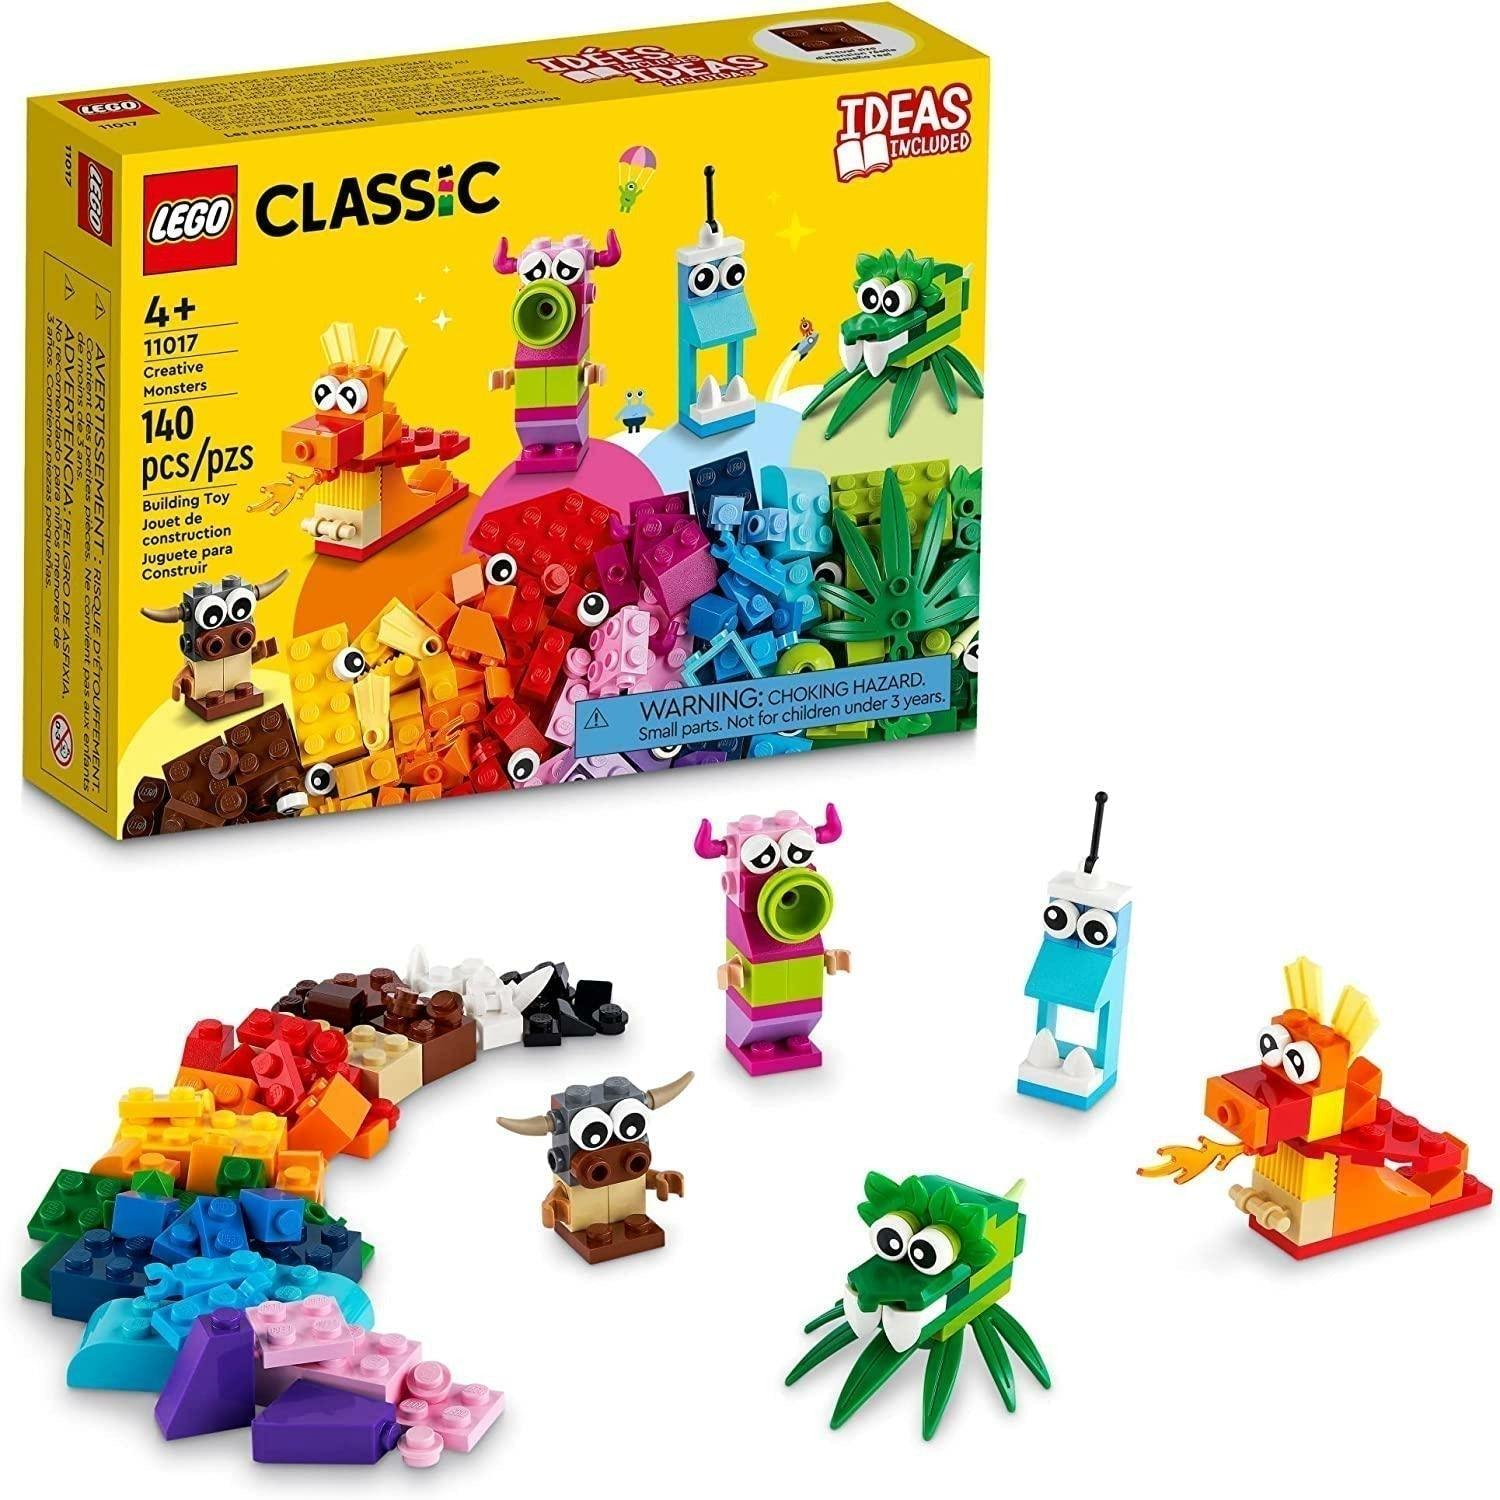 LEGO Classic Creative Monsters 11017 Building Kit; Includes 5 Monster Toy Mini Build Ideas to Inspire Creative Play (140 Pieces) - BumbleToys - 4+ Years, 5-7 Years, Arabic Triangle Trading, Boys, Classic, LEGO